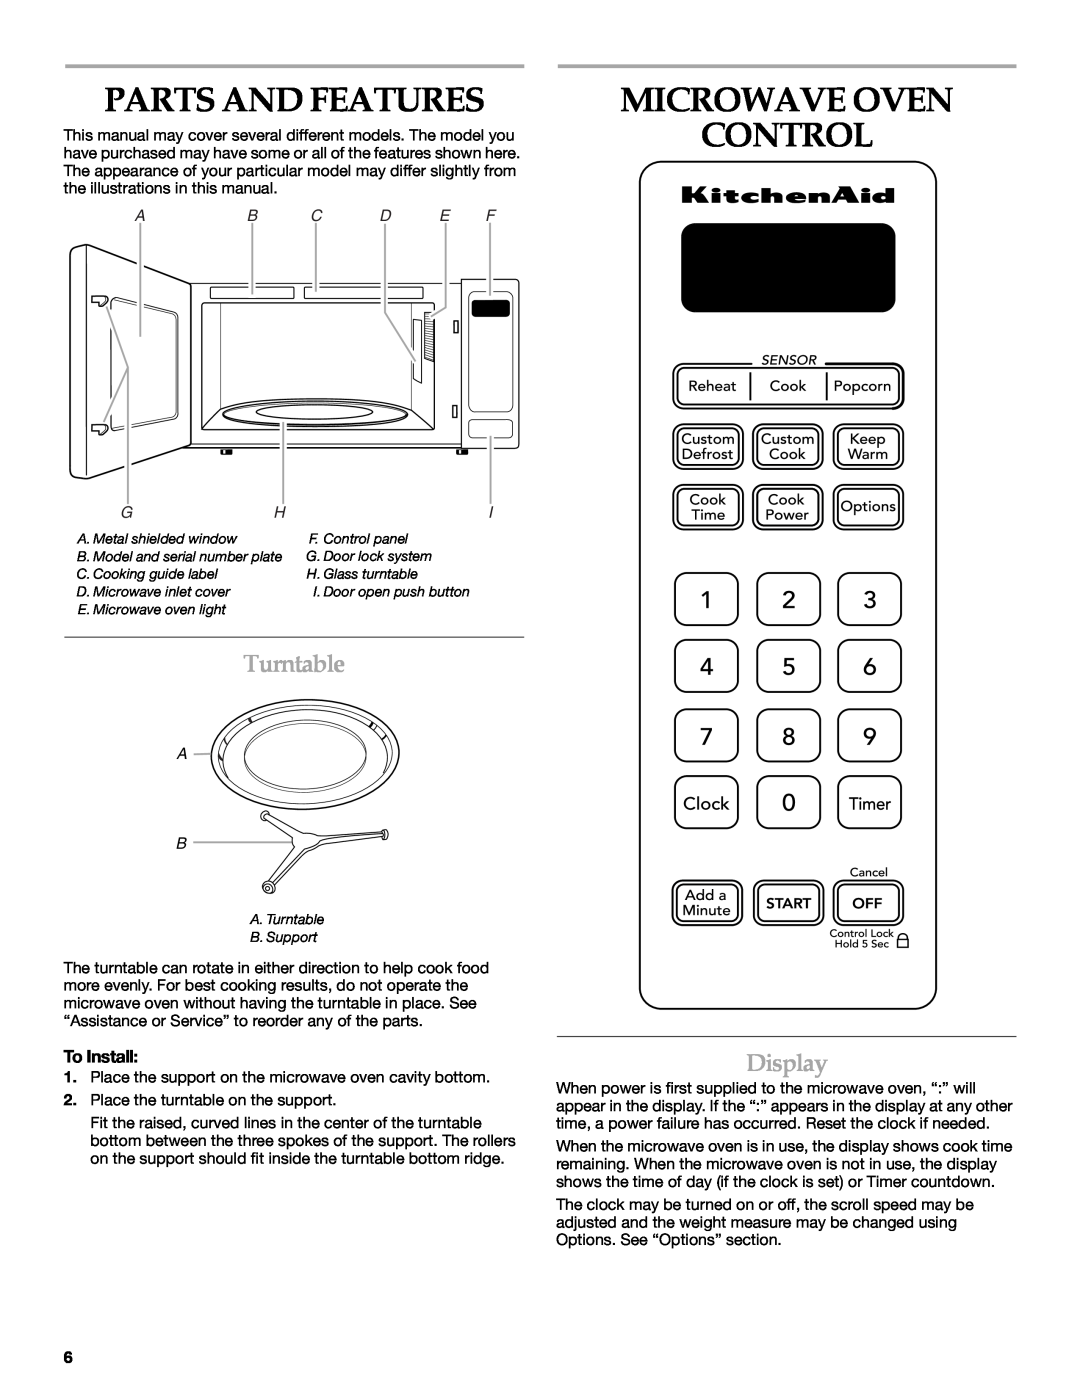 KitchenAid KCMS2055 manual Parts And Features, Microwave Oven Control, Turntable, Display, Ab C D E F 